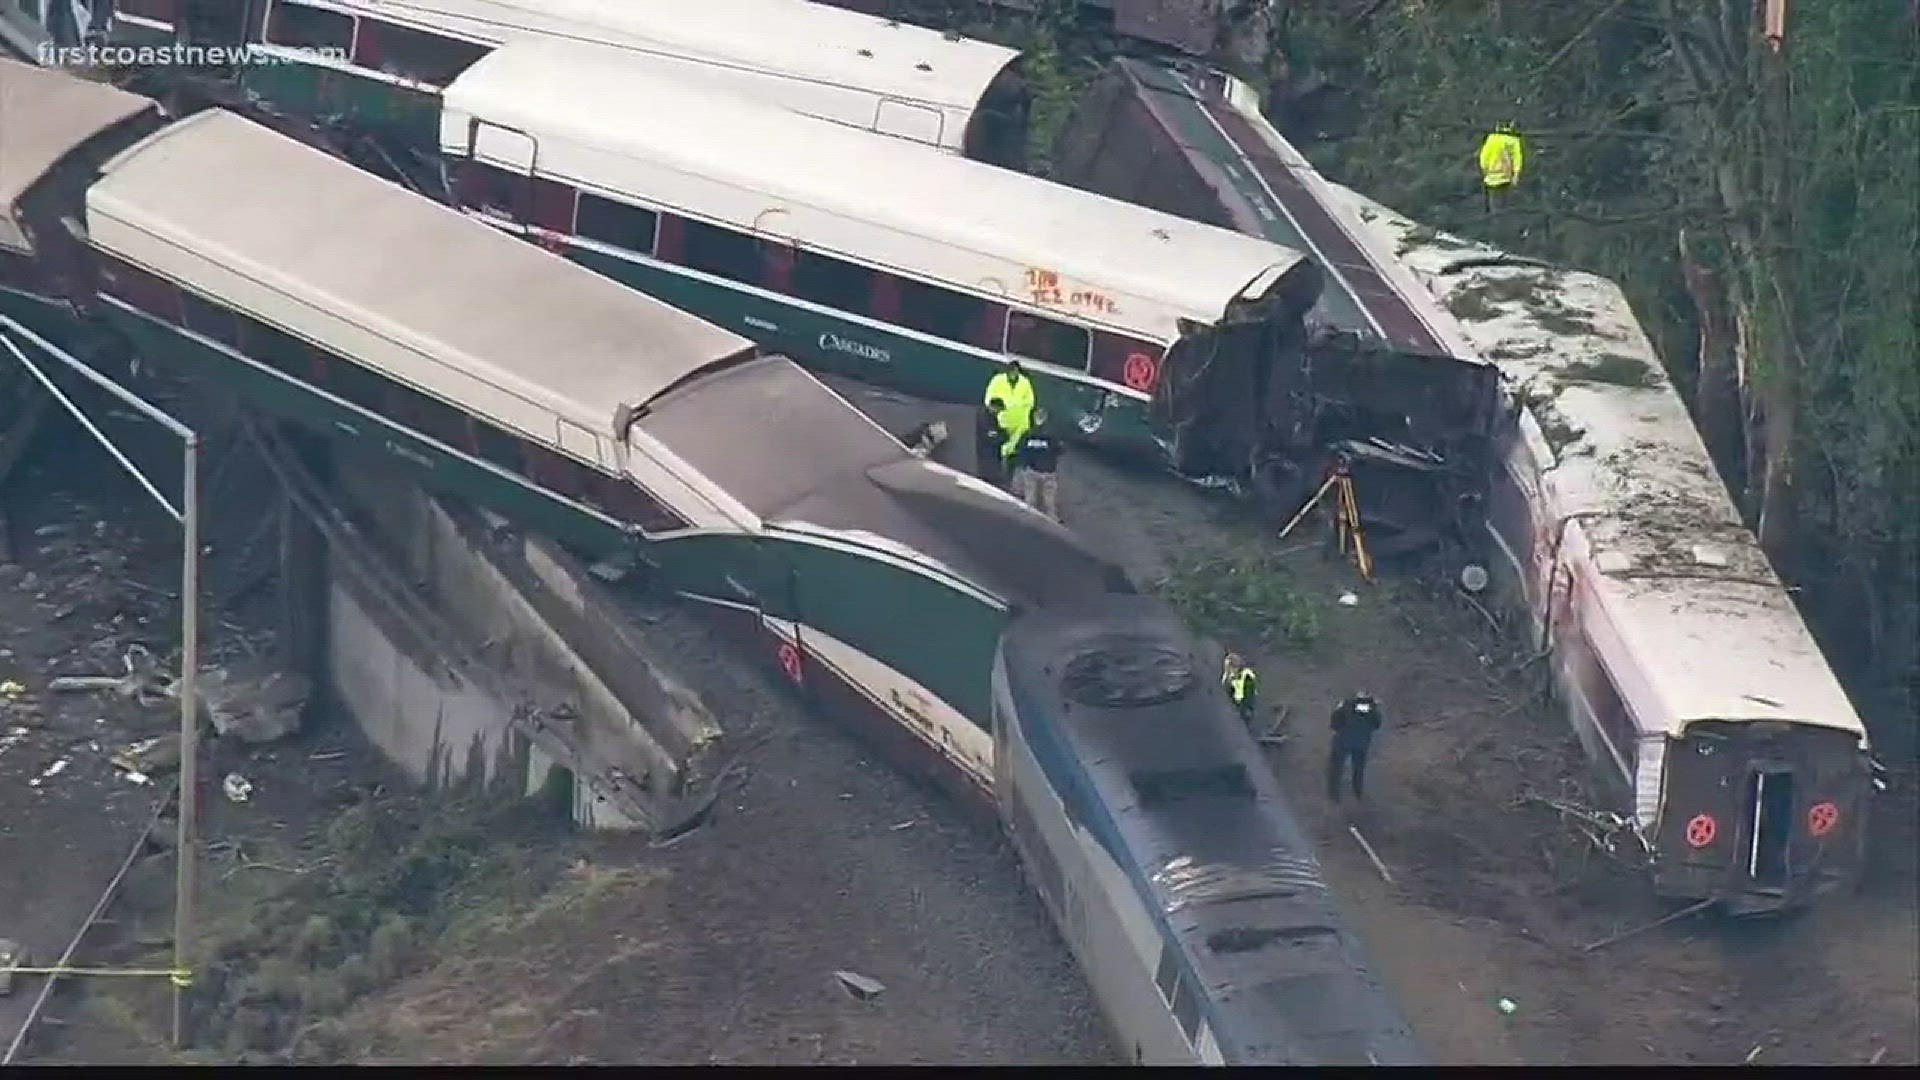 First Coast News has team coverage of the train derailment that killed one man from Orange Park.